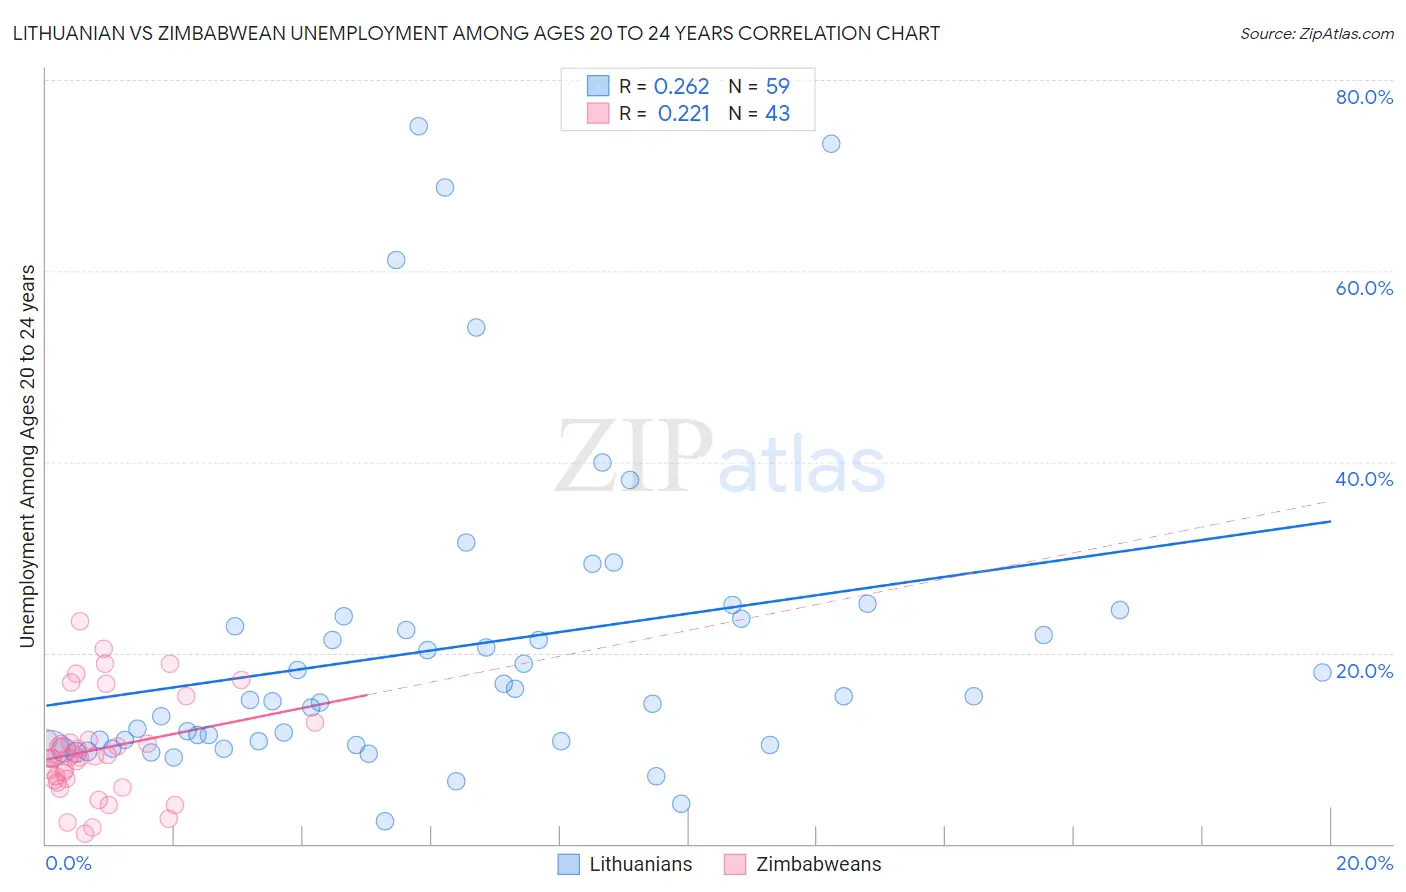 Lithuanian vs Zimbabwean Unemployment Among Ages 20 to 24 years